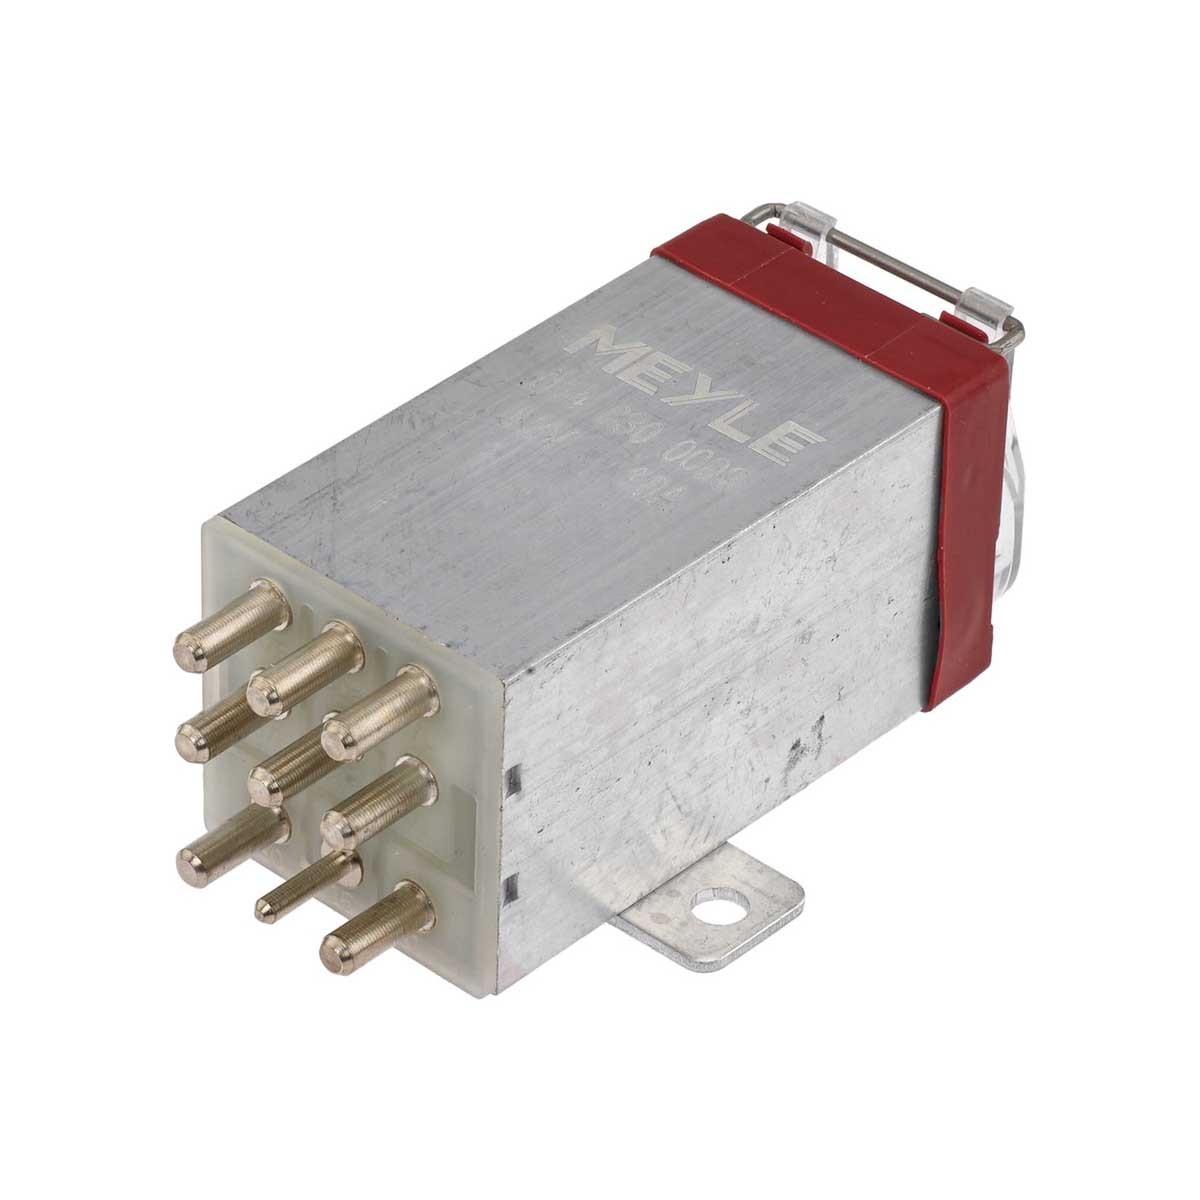 Mercedes C124 Sensors, relays, control units parts - Overvoltage Protection Relay, ABS MEYLE 014 830 0009